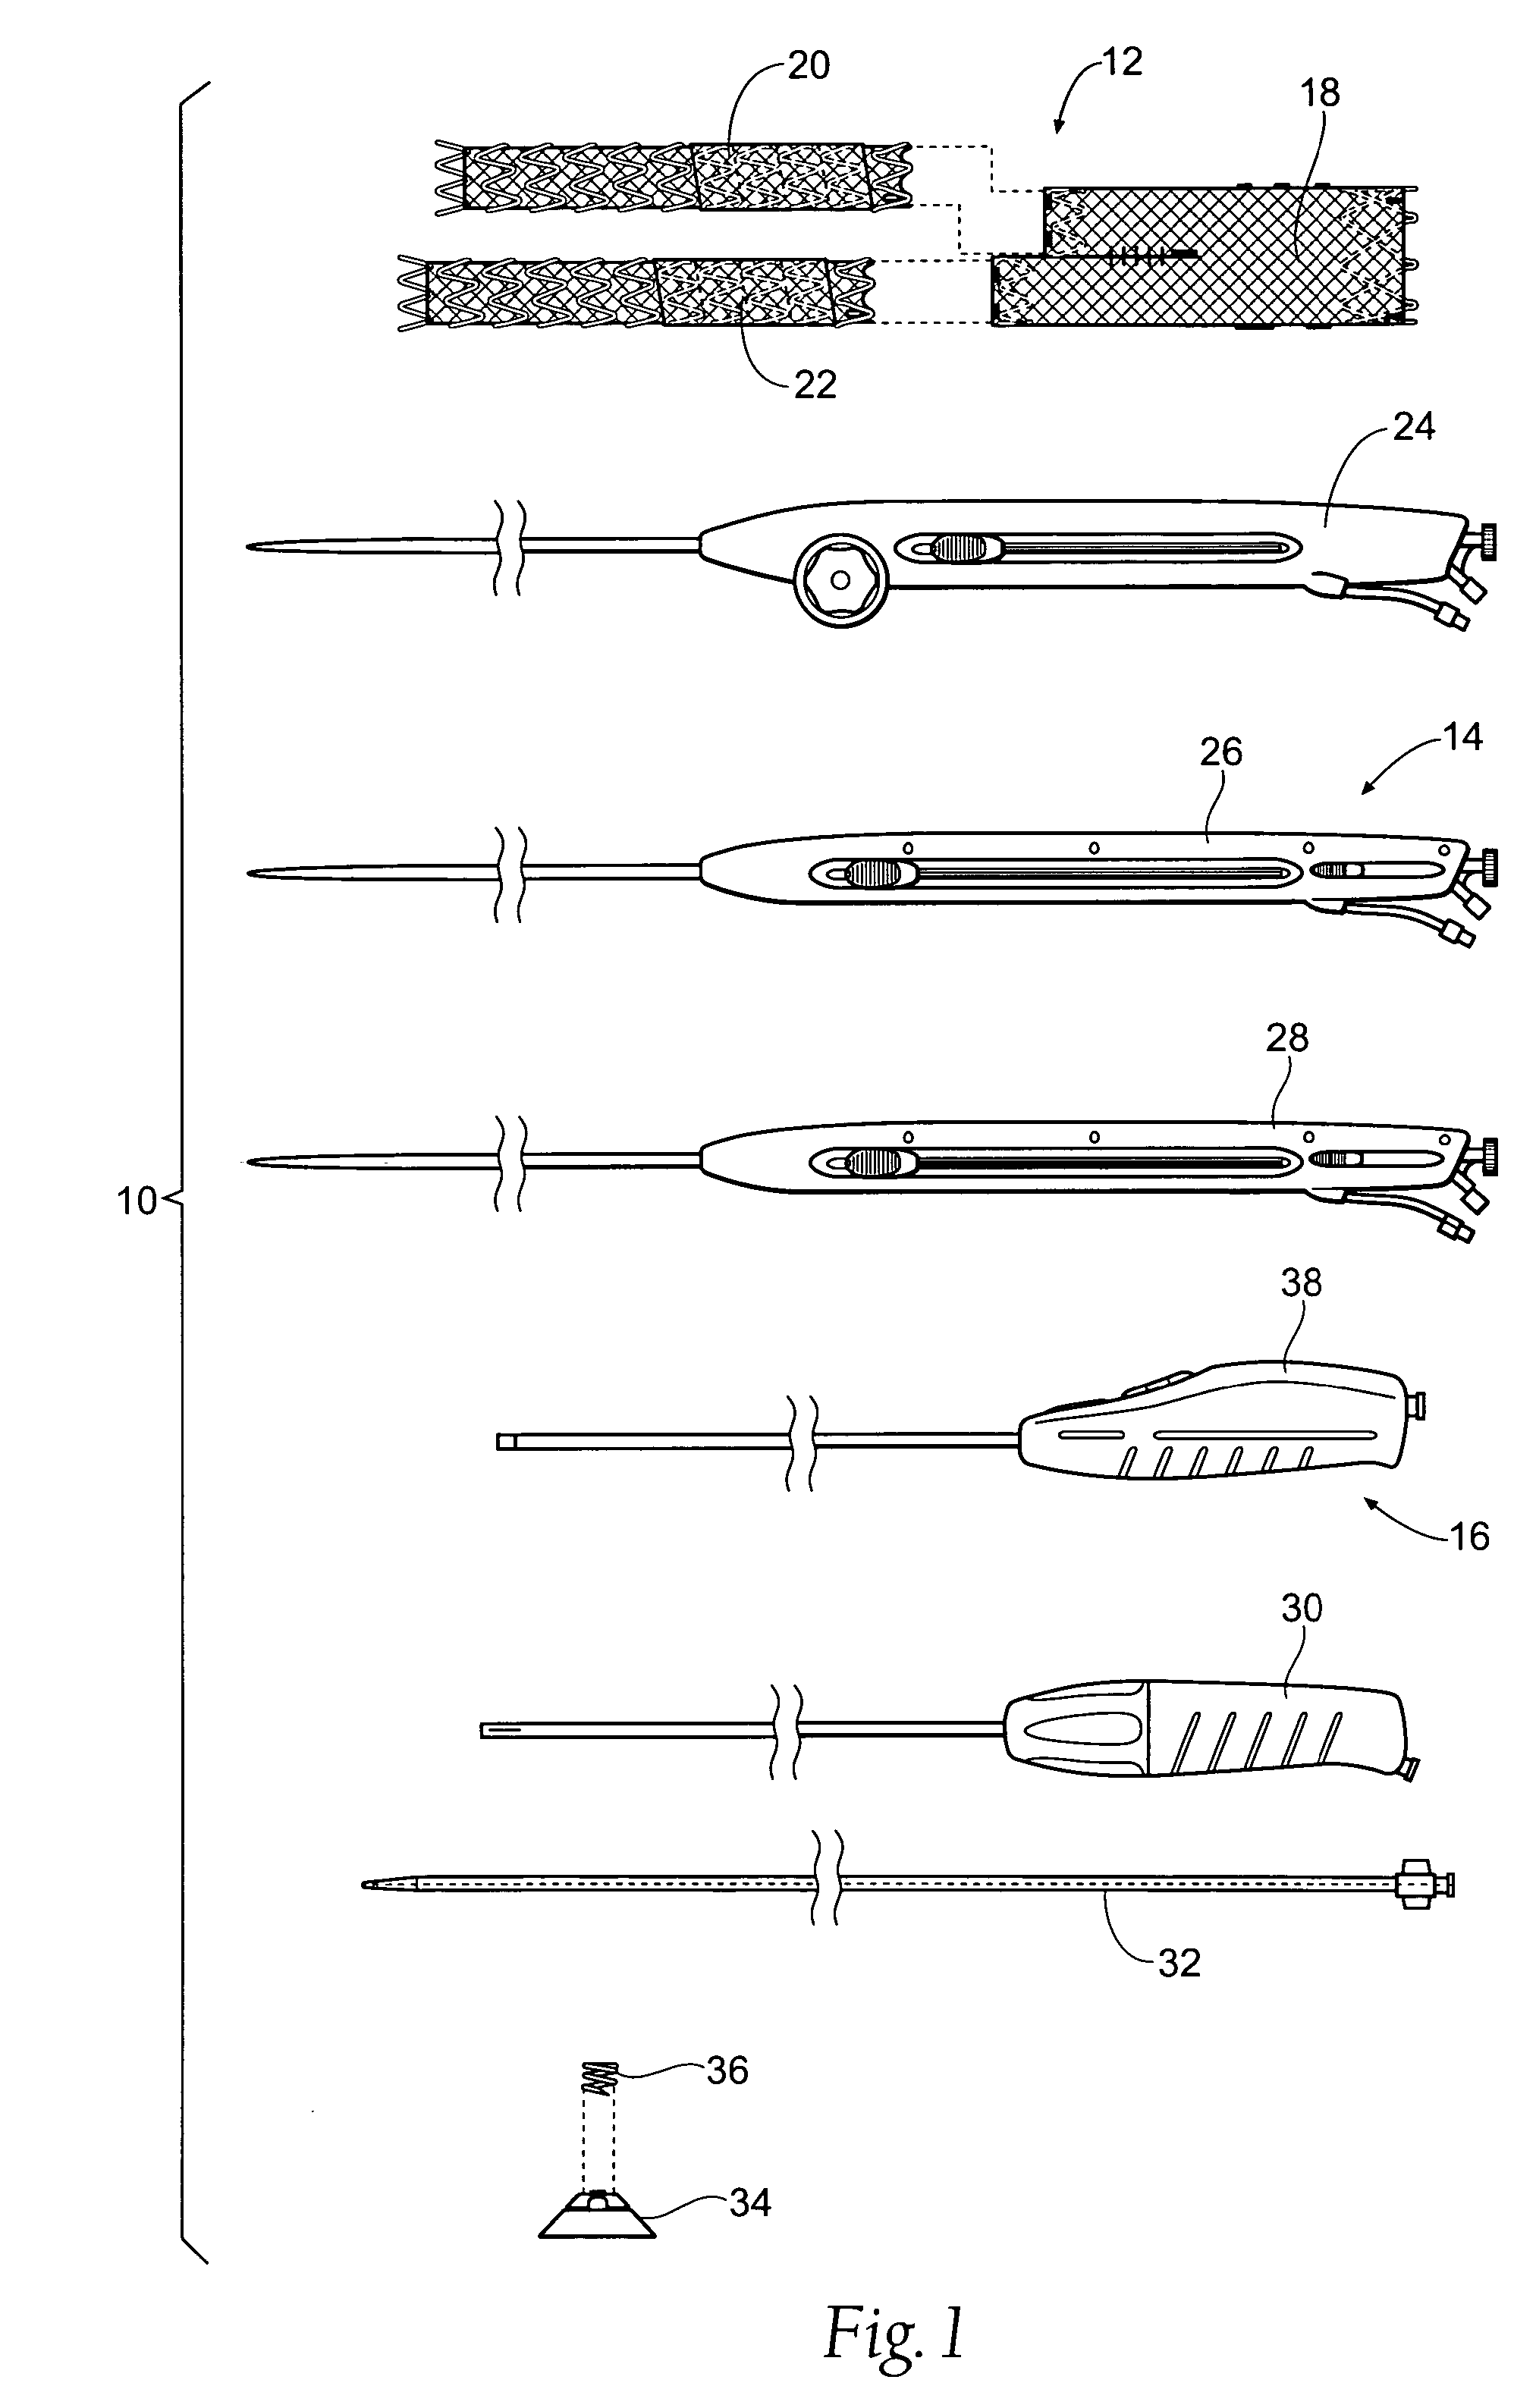 Endovascular aneurysm devices, systems, and methods